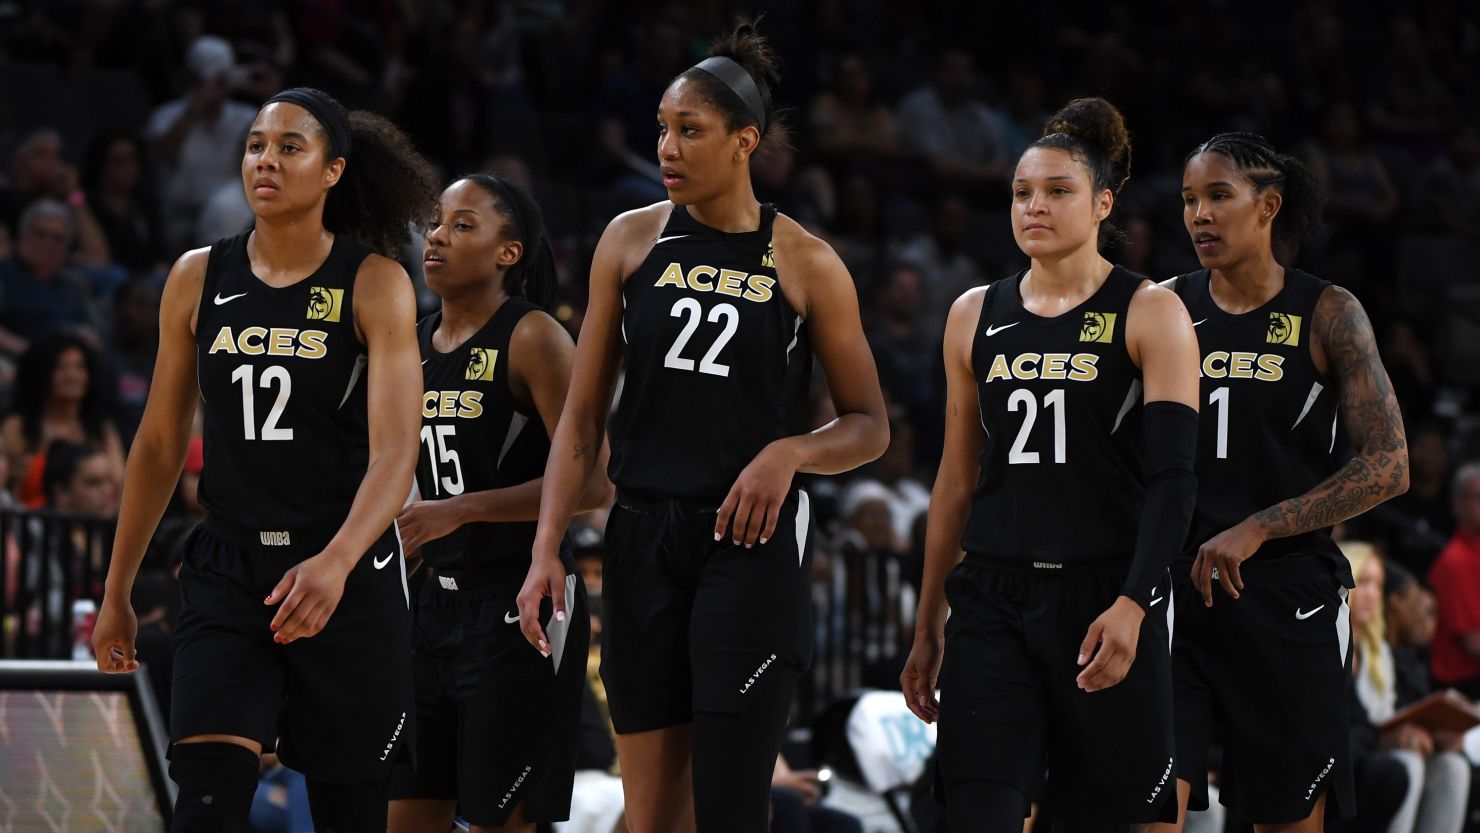 The Las Vegas Aces became the first WNBA team to forfeit a game, after declining to take the court on Friday. 